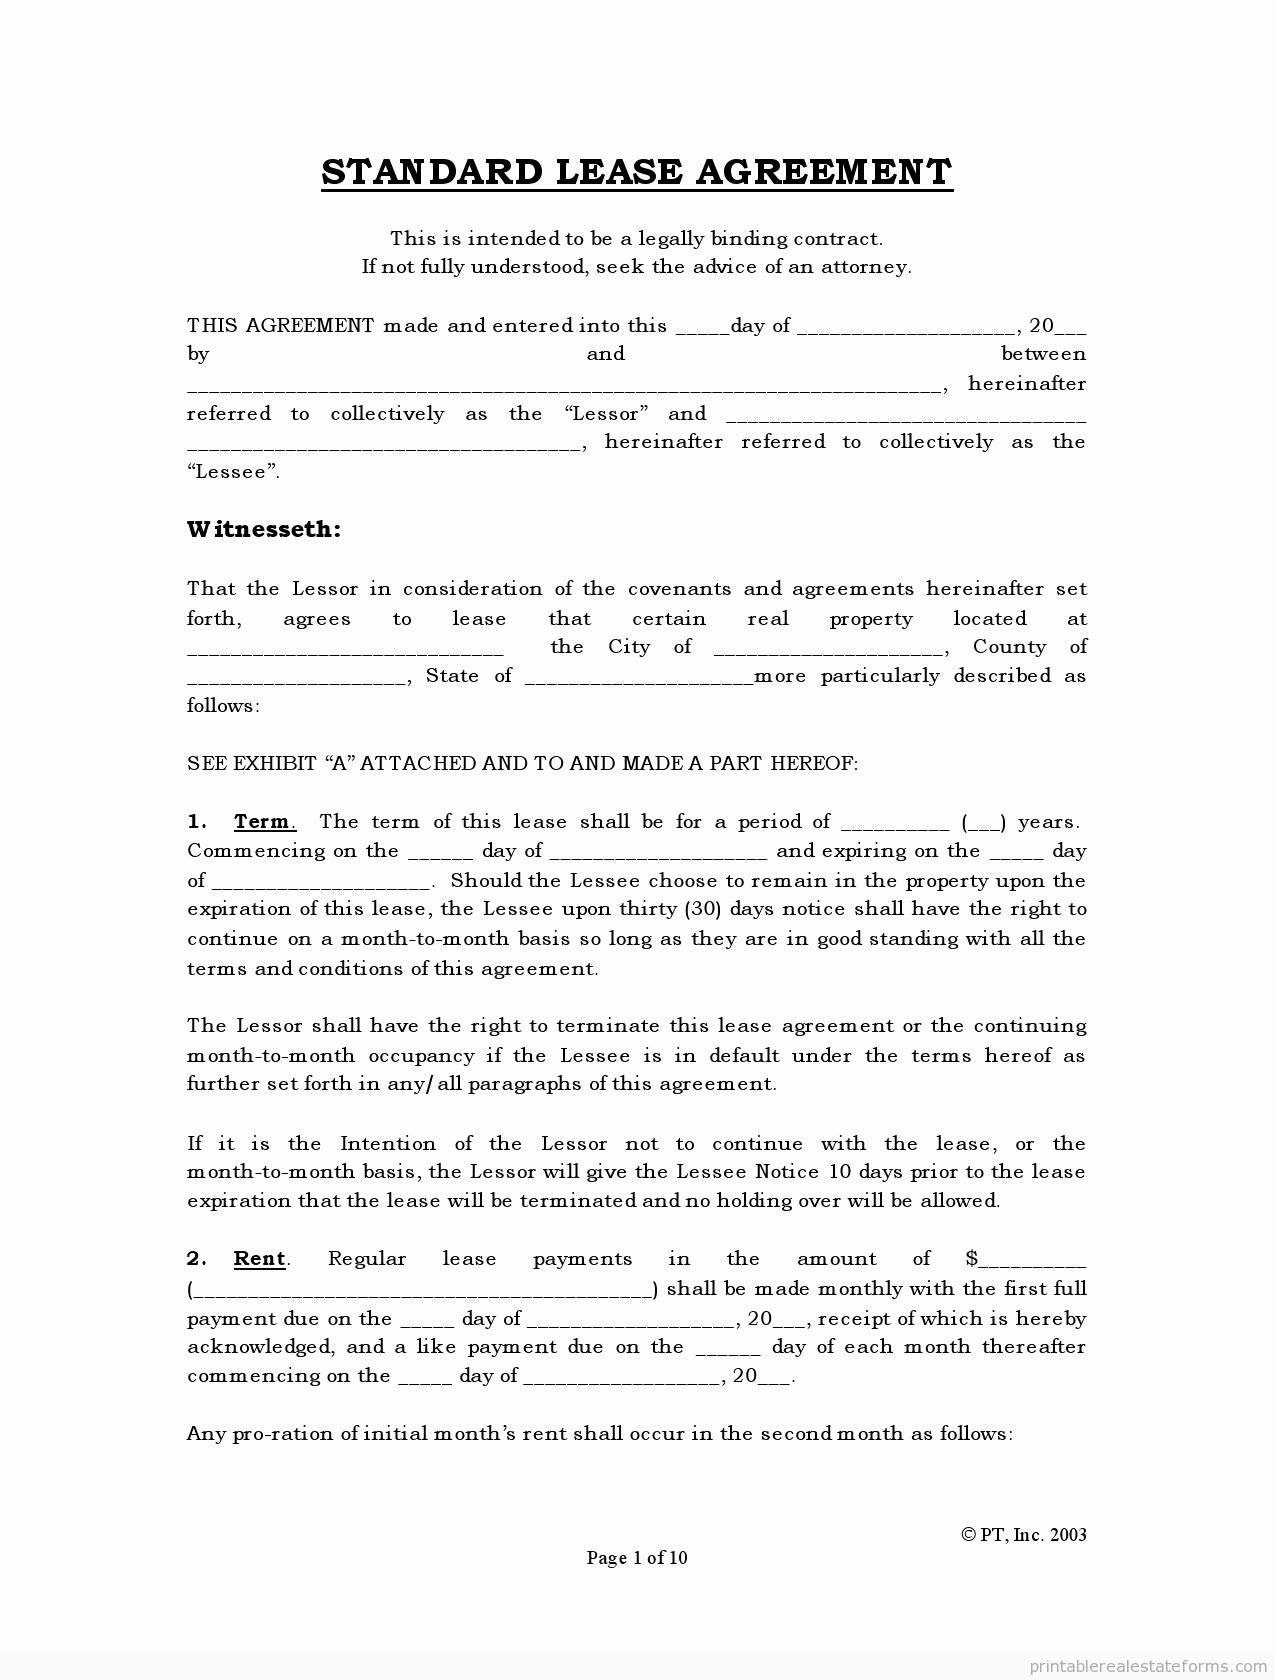 50 Awesome Template Lease Agreement California Ideas Ezlandlordforms Residential